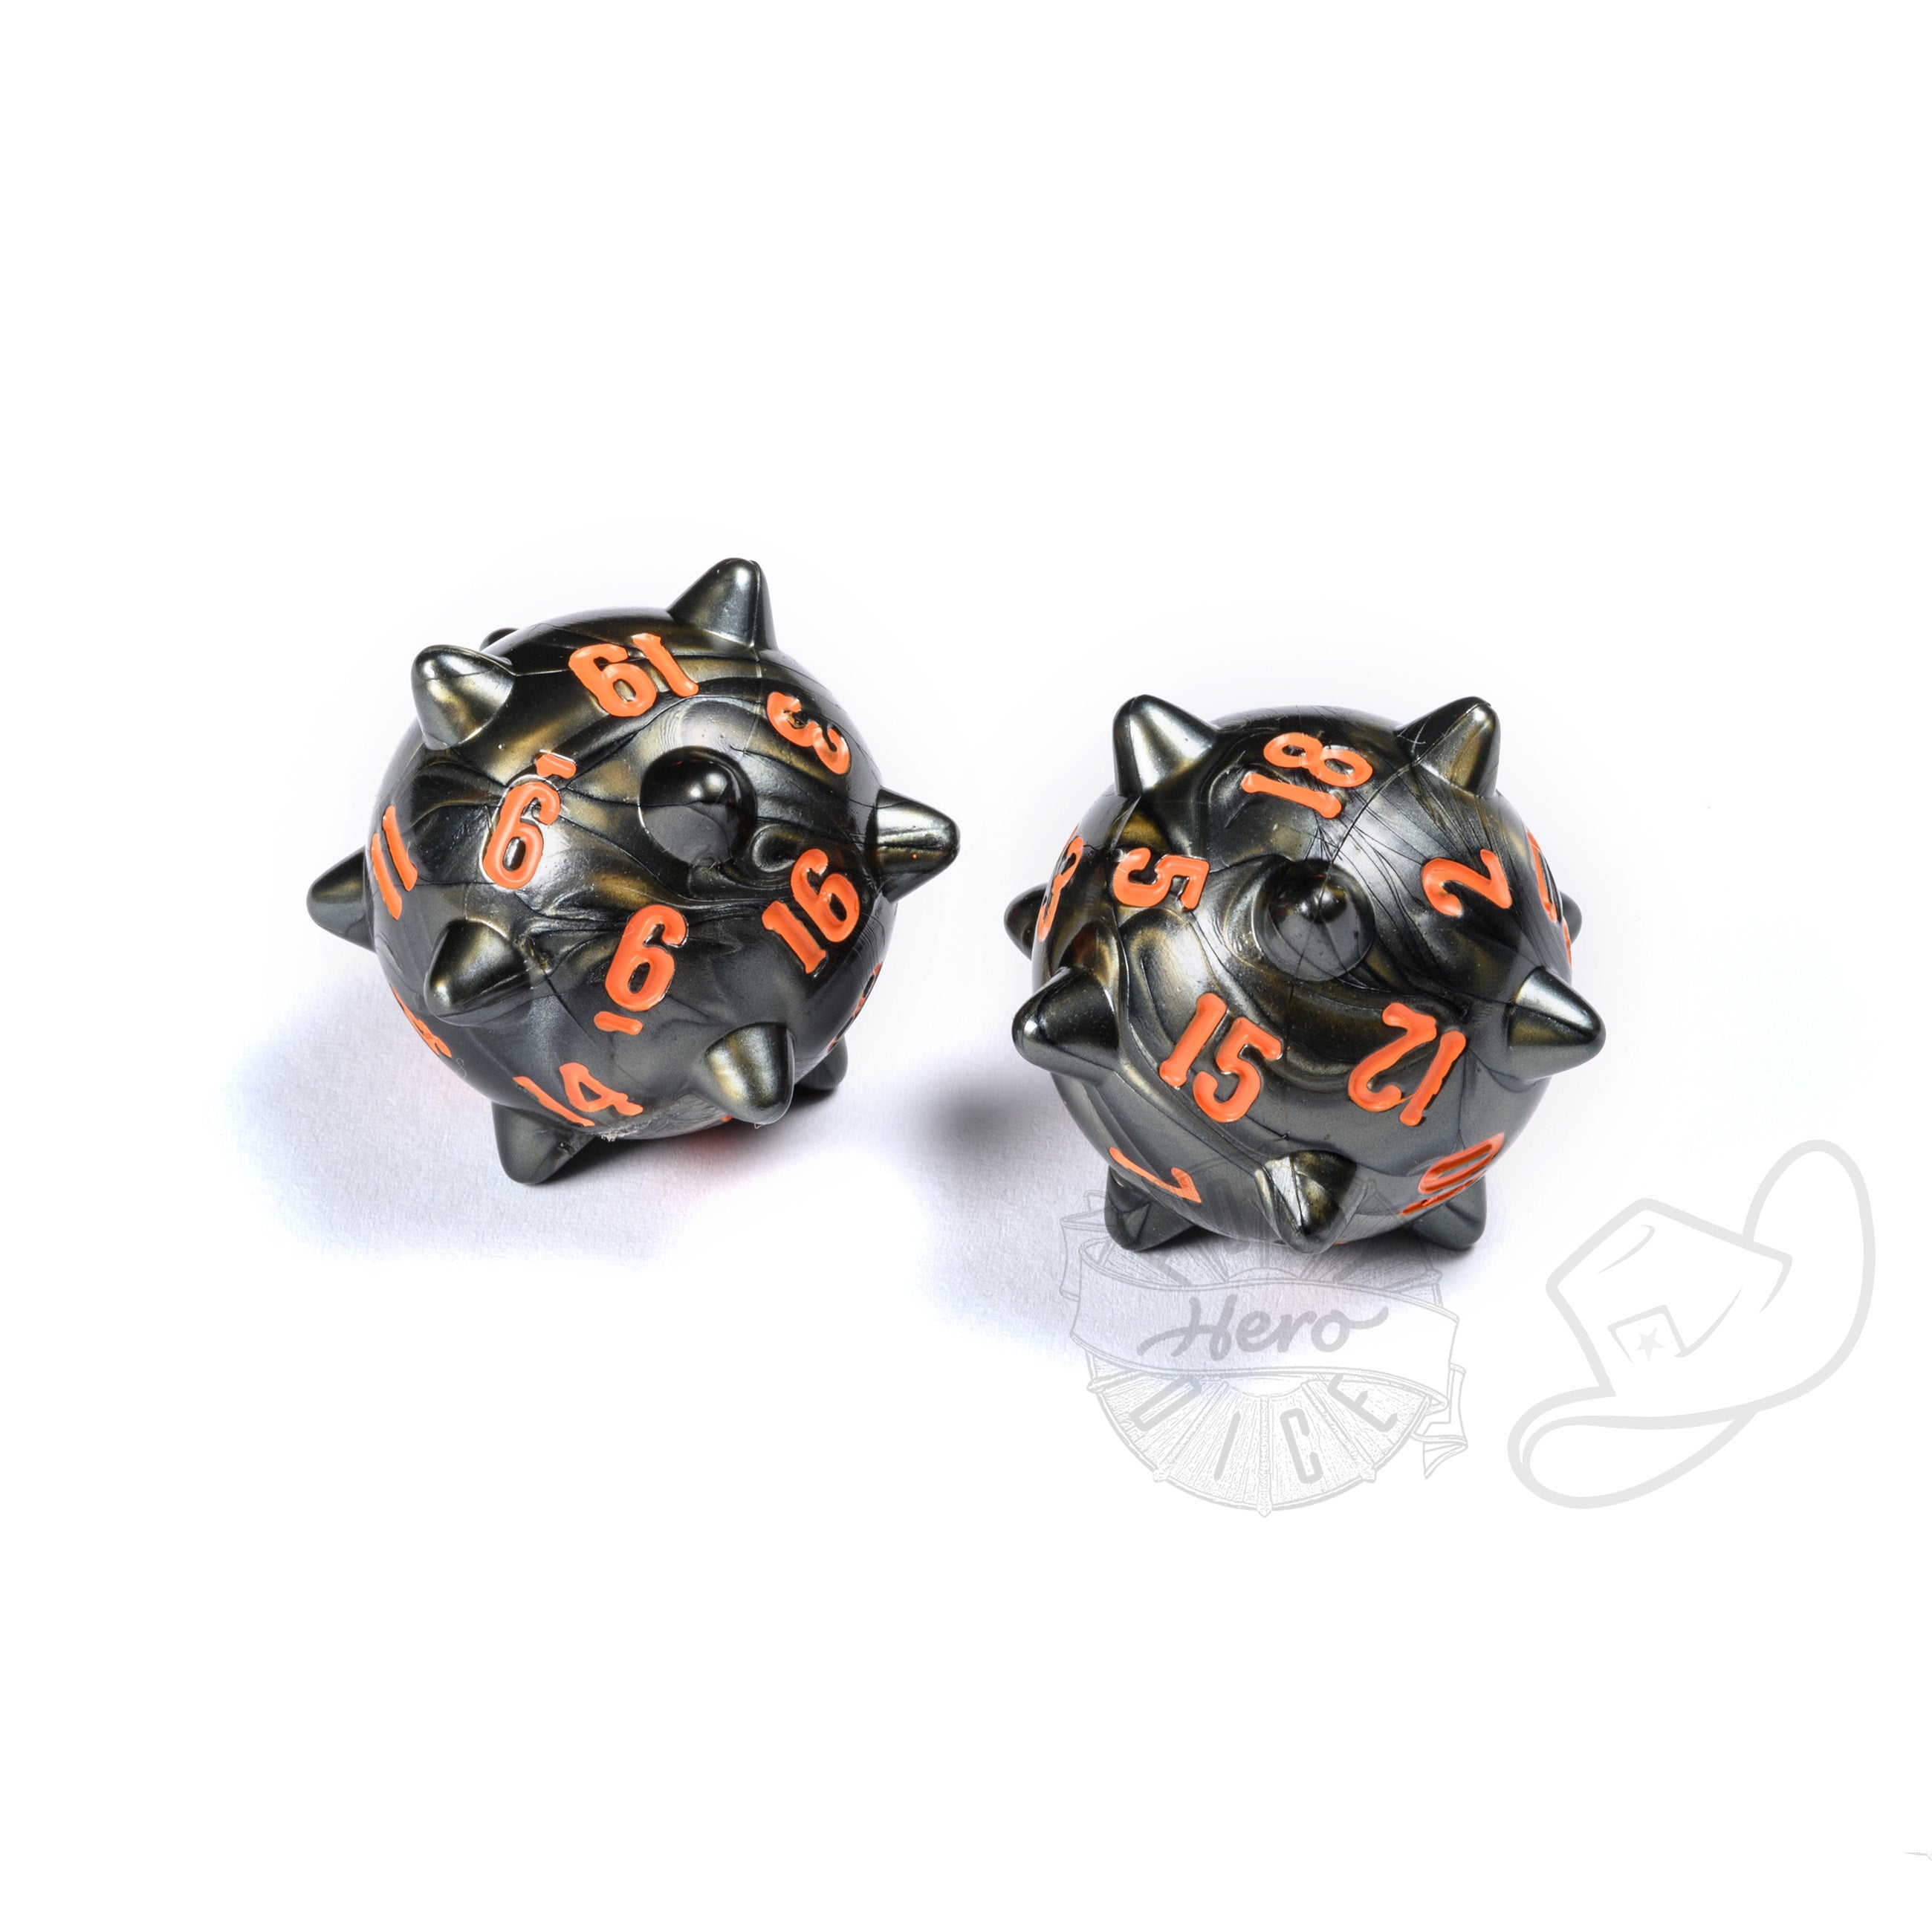 PolyHero Warrior d20 roleplaying dice Spiked Balls Steel Grey